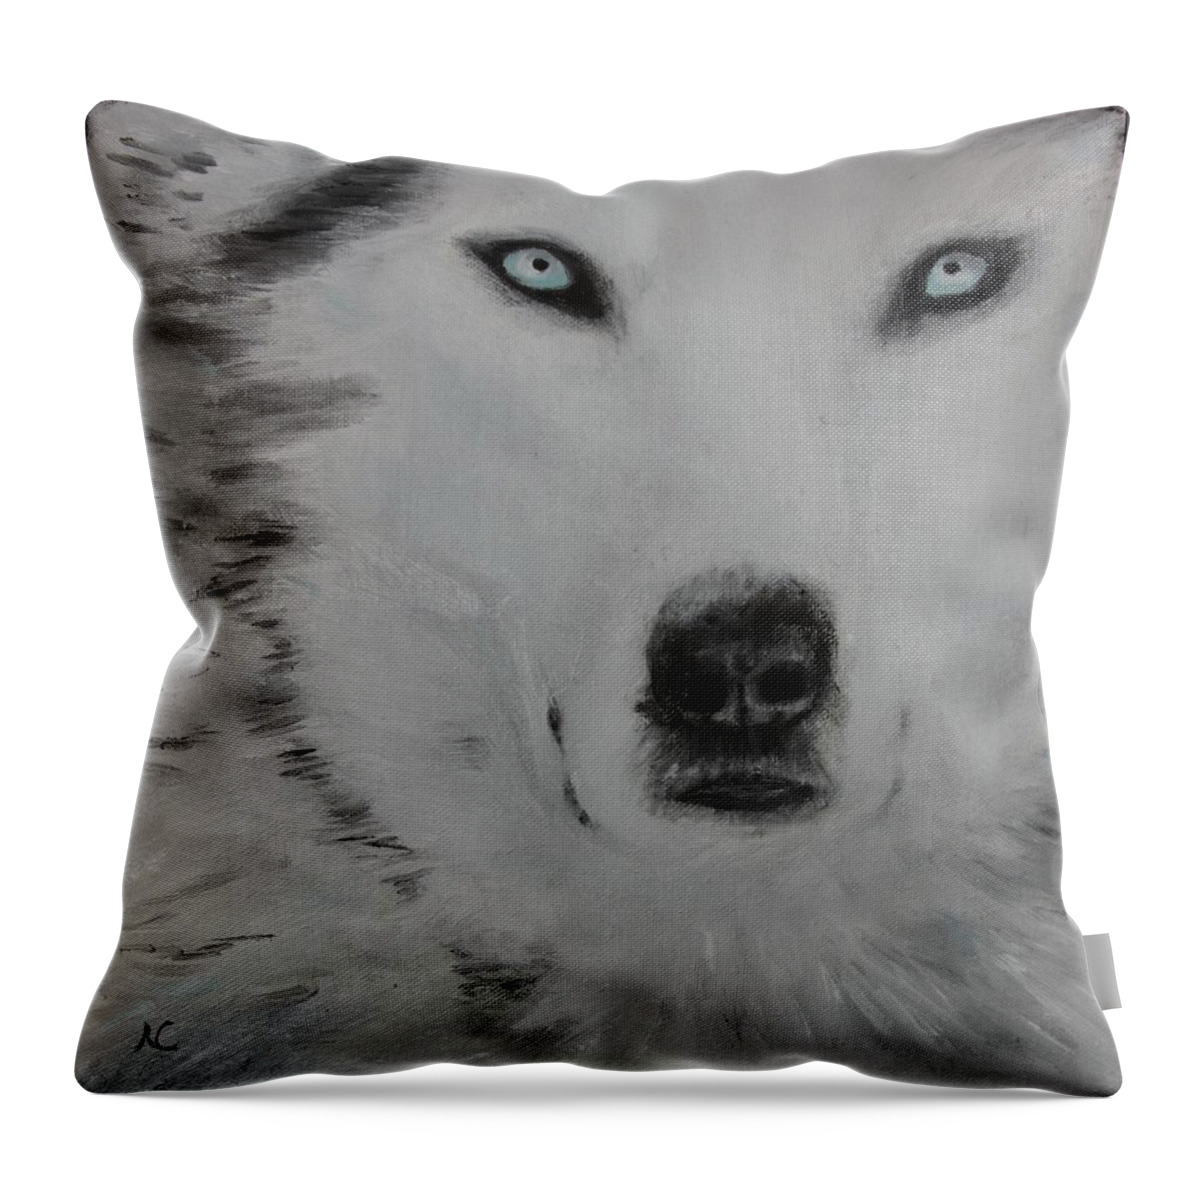 Wolfs Throw Pillow featuring the painting The Stare by Neslihan Ergul Colley